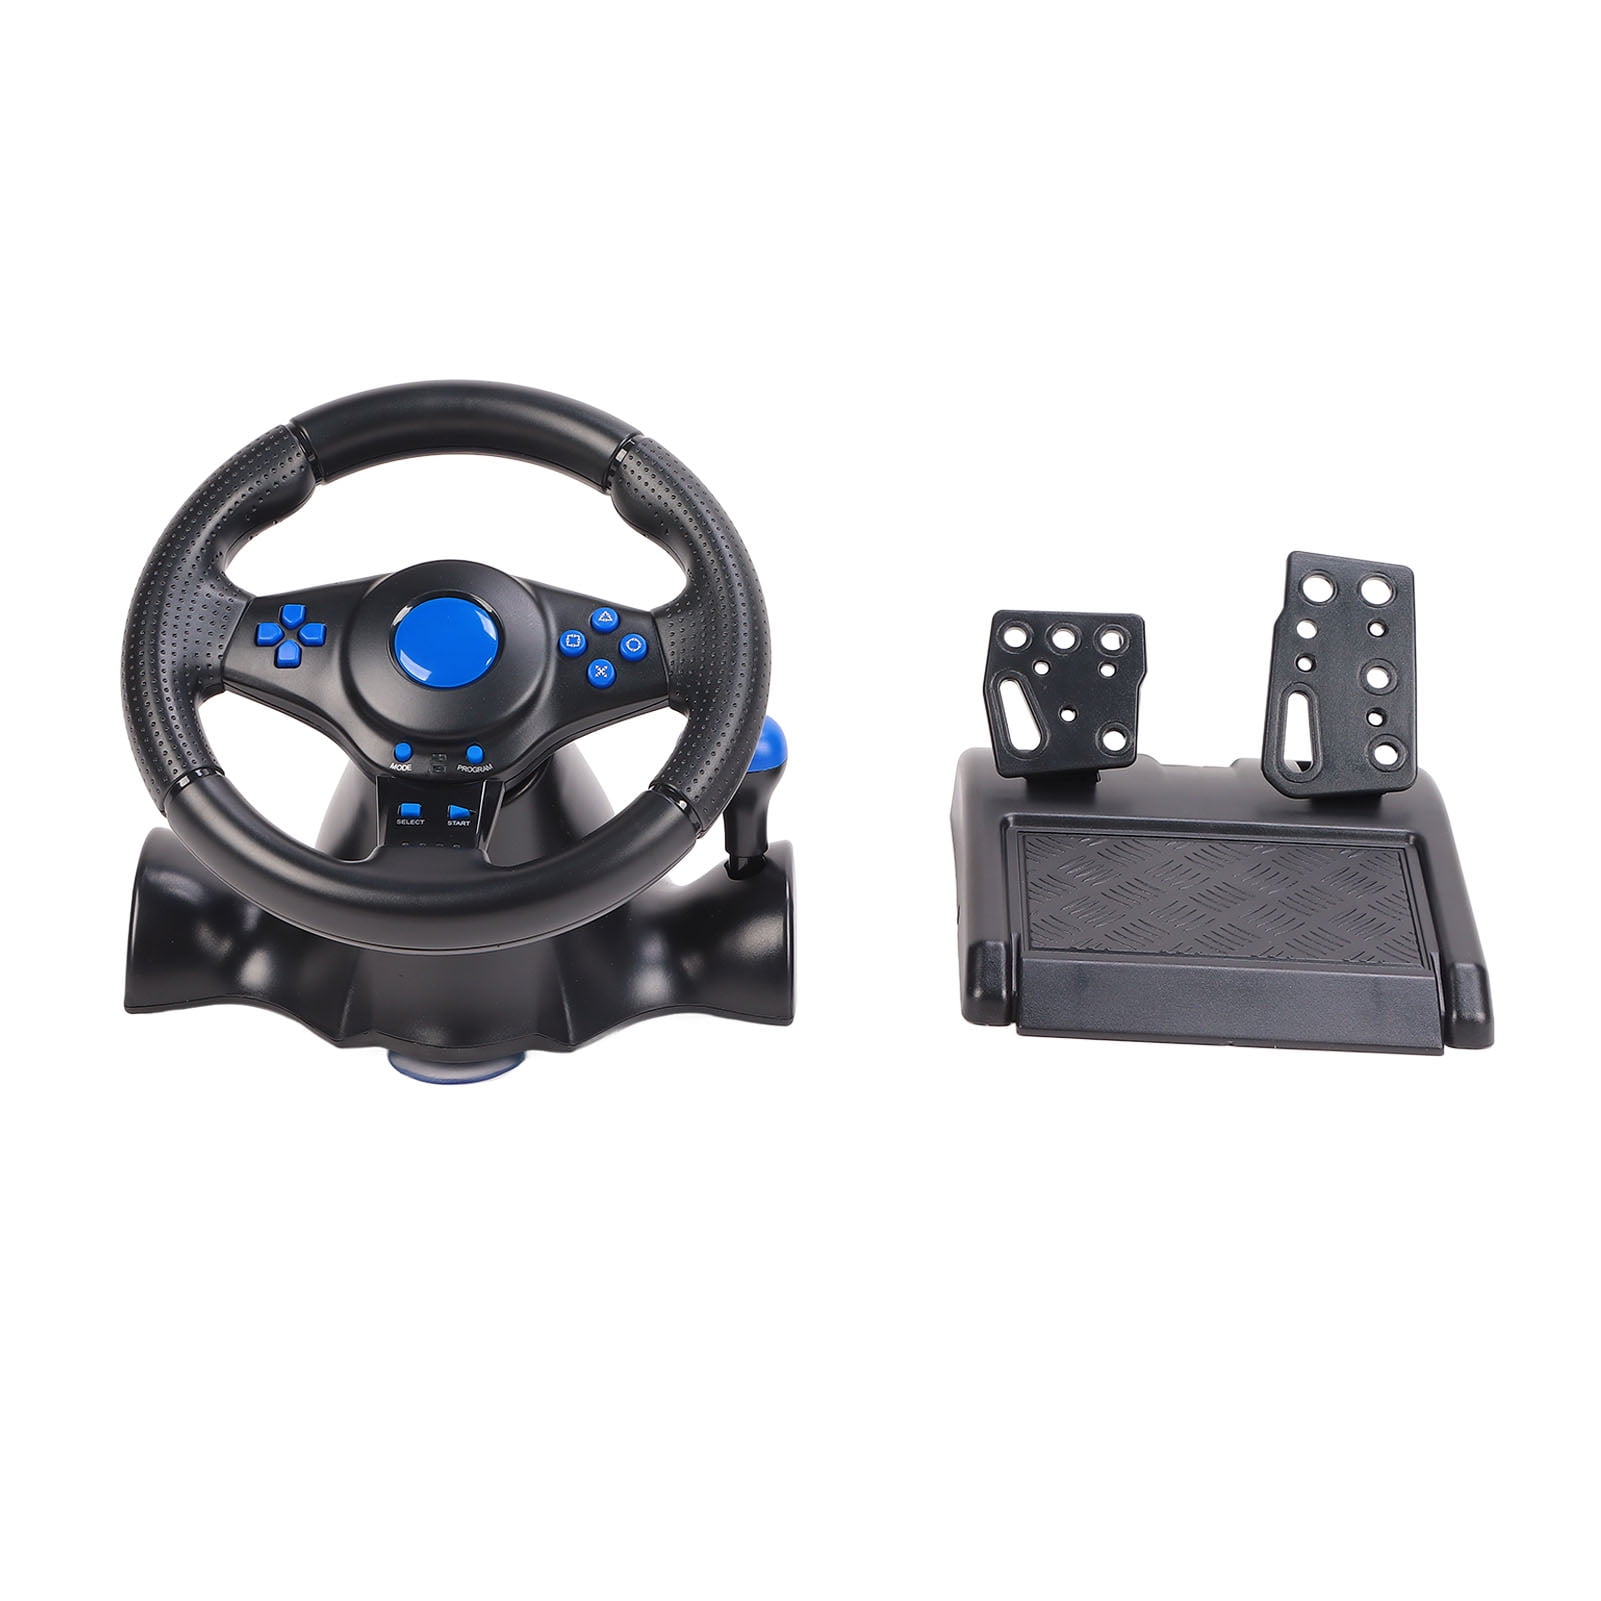 ESTINK PC Game Racing Wheel,Game Steering Wheel 180 Rotation 7 in 1  Vibration USB Racing Game Wheel with Pedal for PS4 PC,Game Steering Wheel 